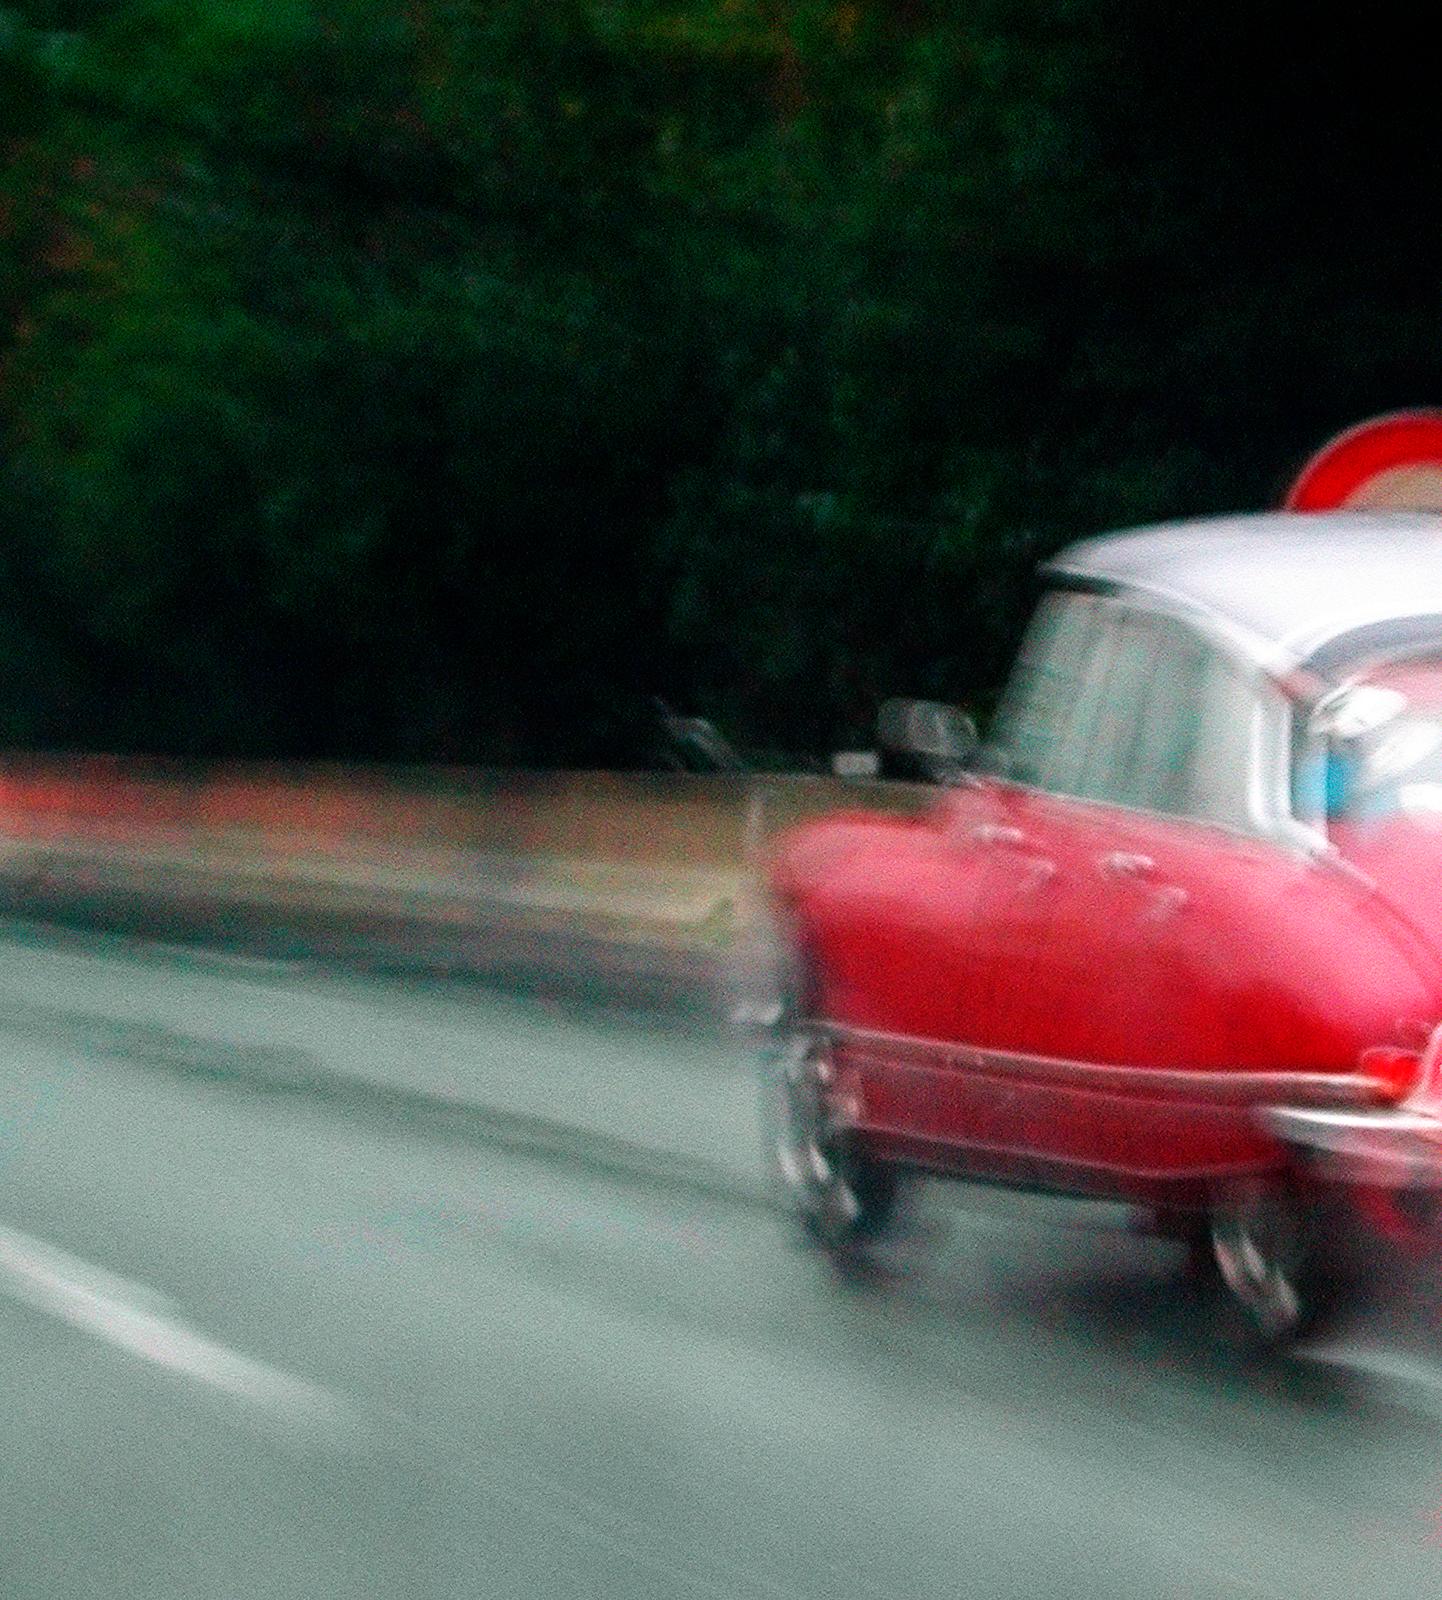 Citroen - Signed limited edition contemporary print, Color photo, Car, Transport - Contemporary Photograph by Ian Sanderson